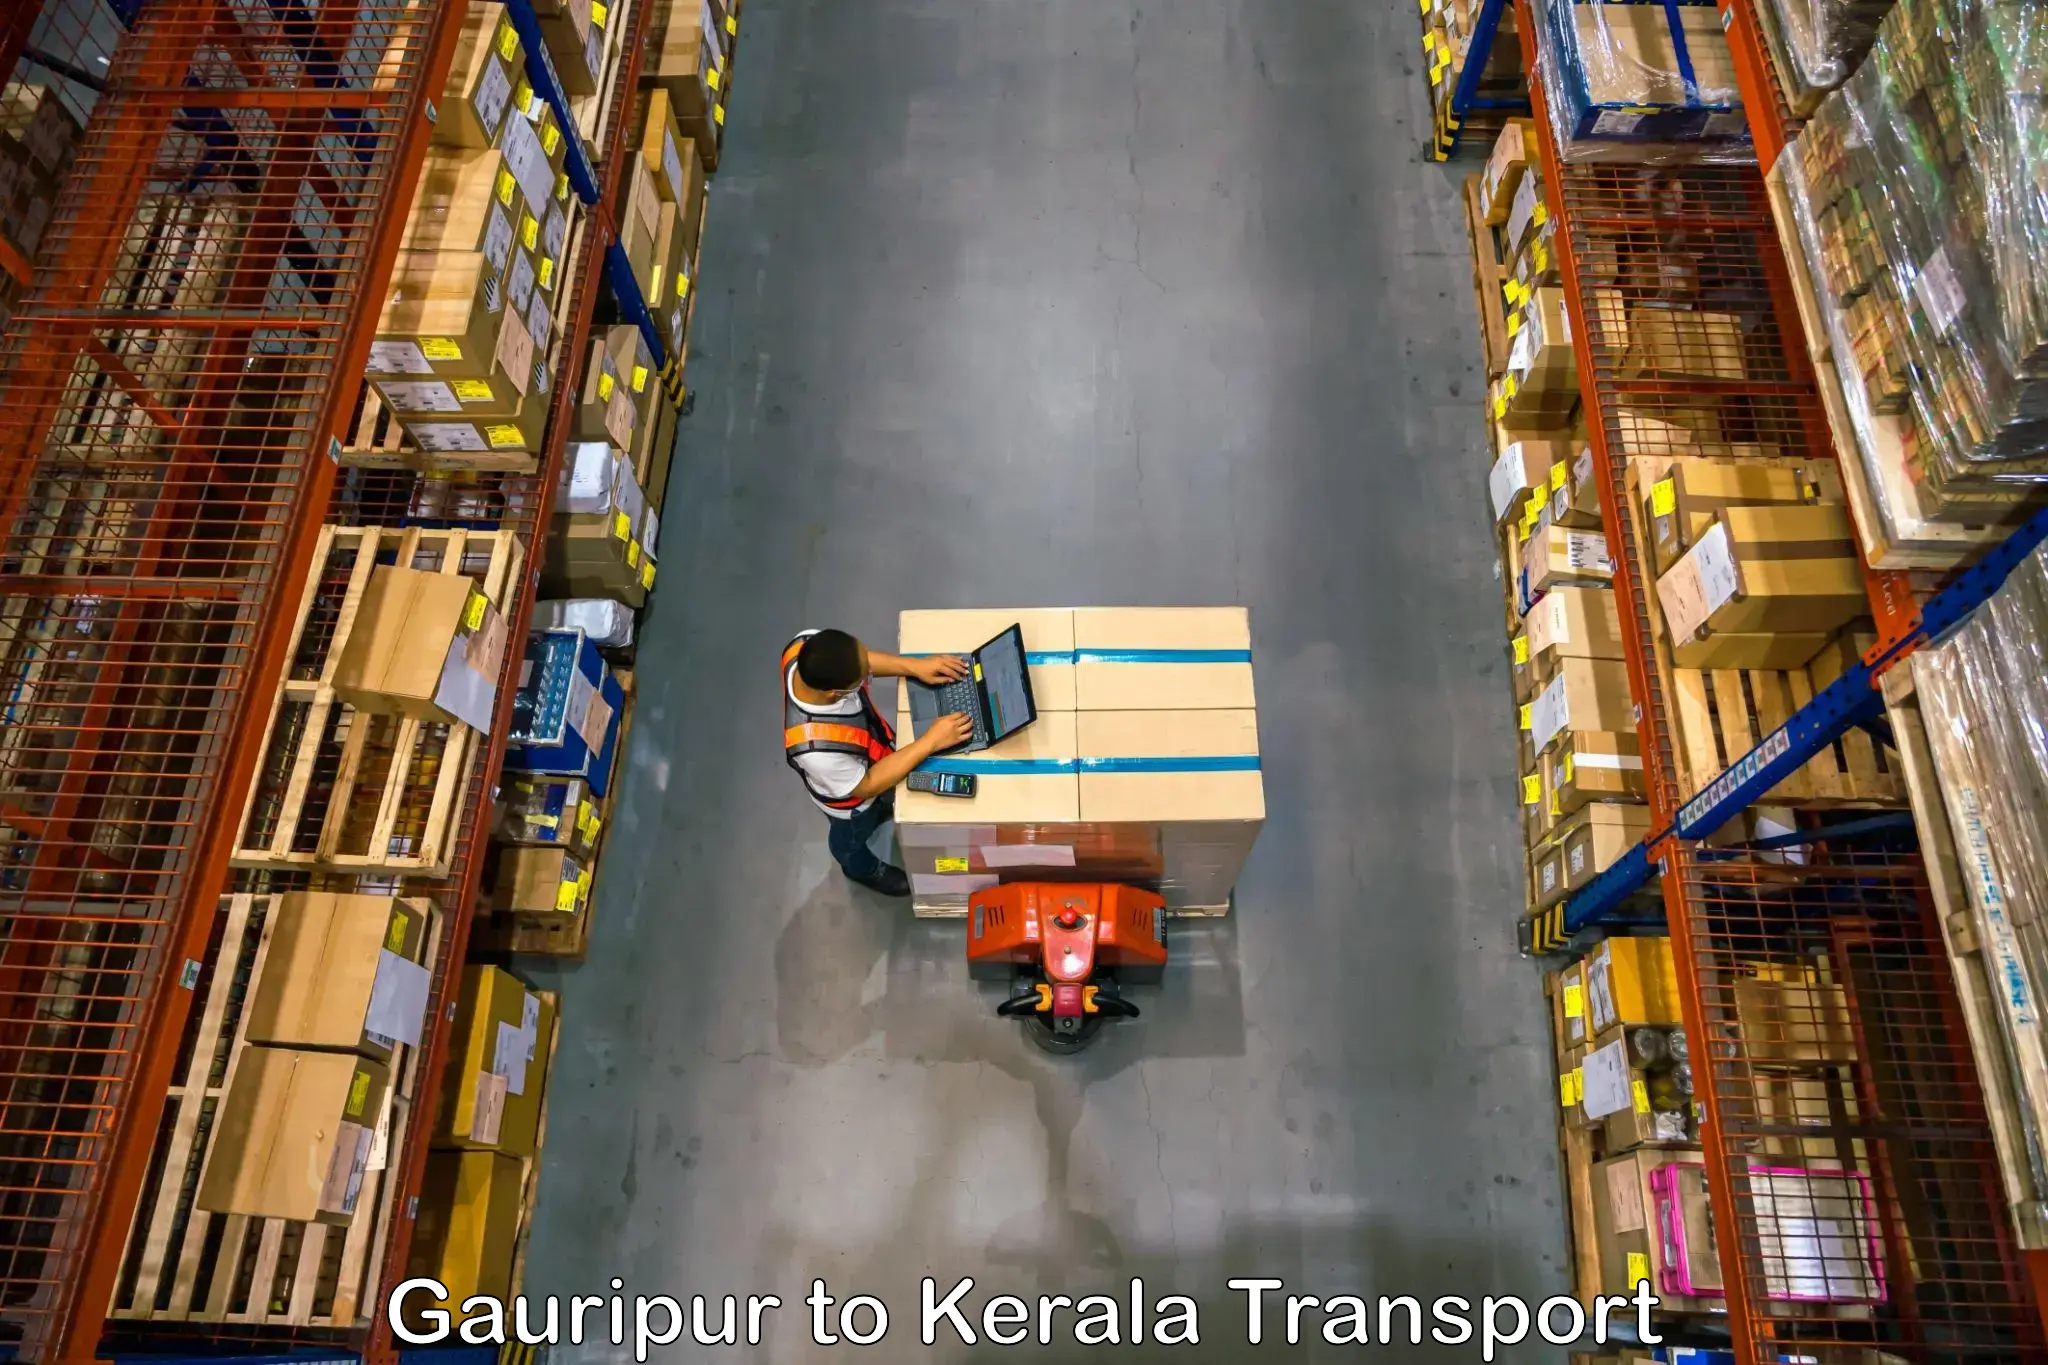 Express transport services Gauripur to Piravom